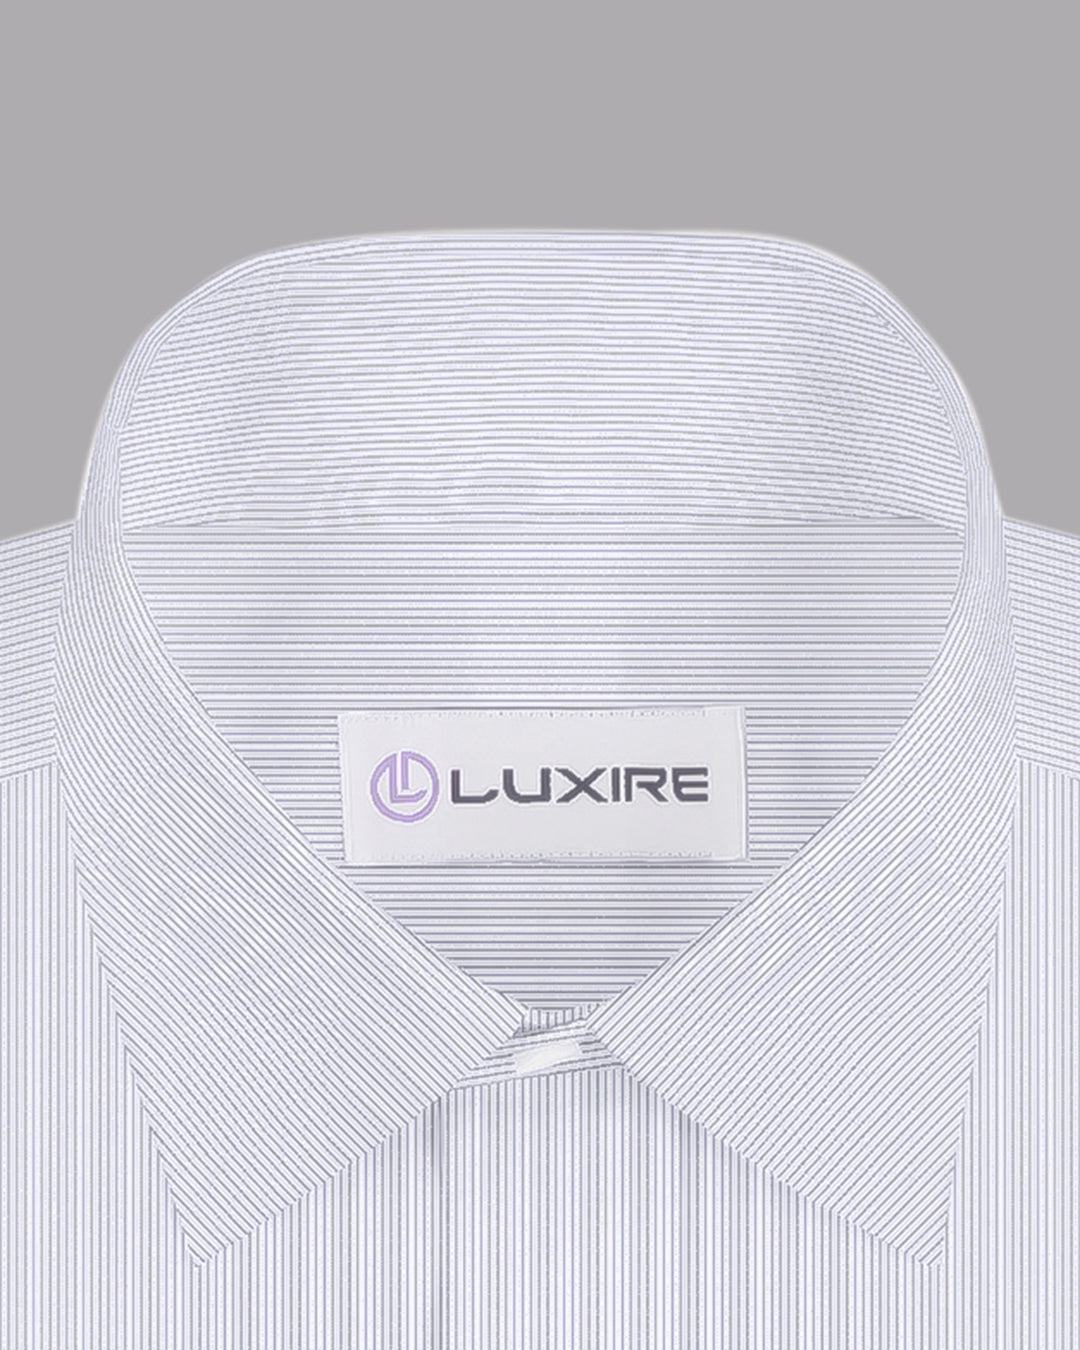 Collar of the custom linen shirt for men in white with ink blue stripes by Luxire Clothing